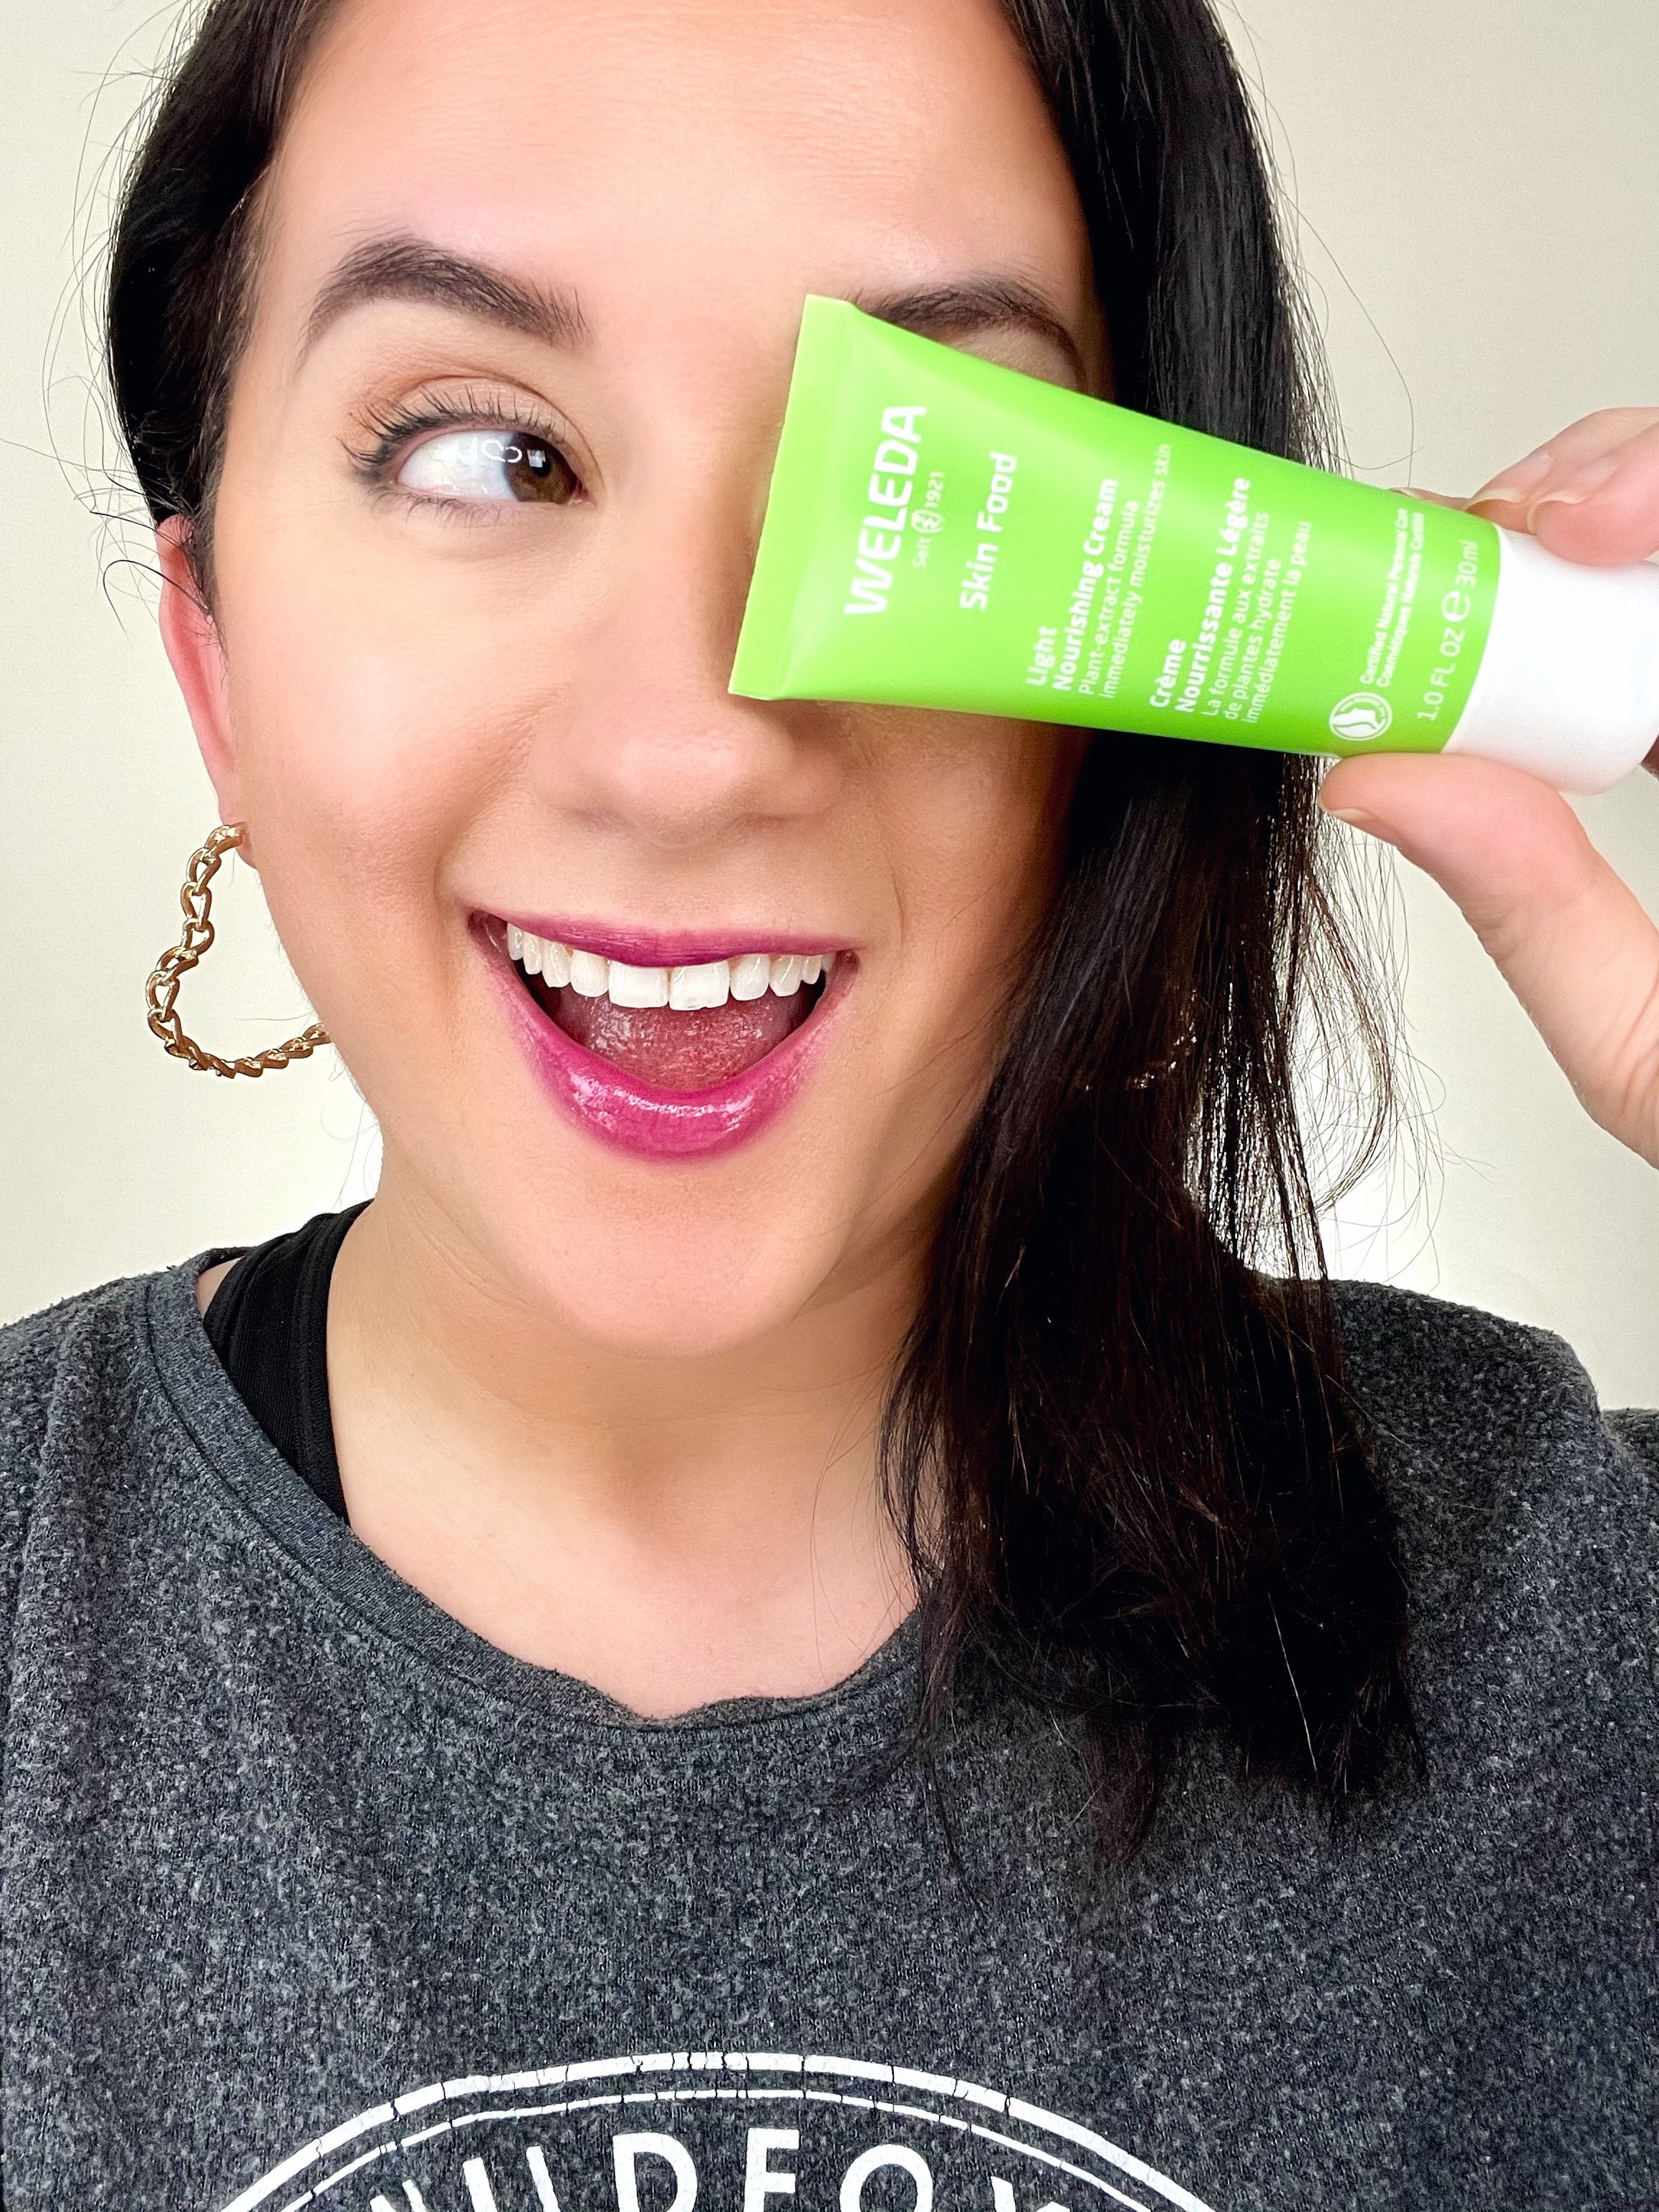 My Honest Review of the Weleda Skin Food Light Nourishing Cream — The  StyleShaker - A Guide to Clean, Green Beauty, Skincare & Beyond